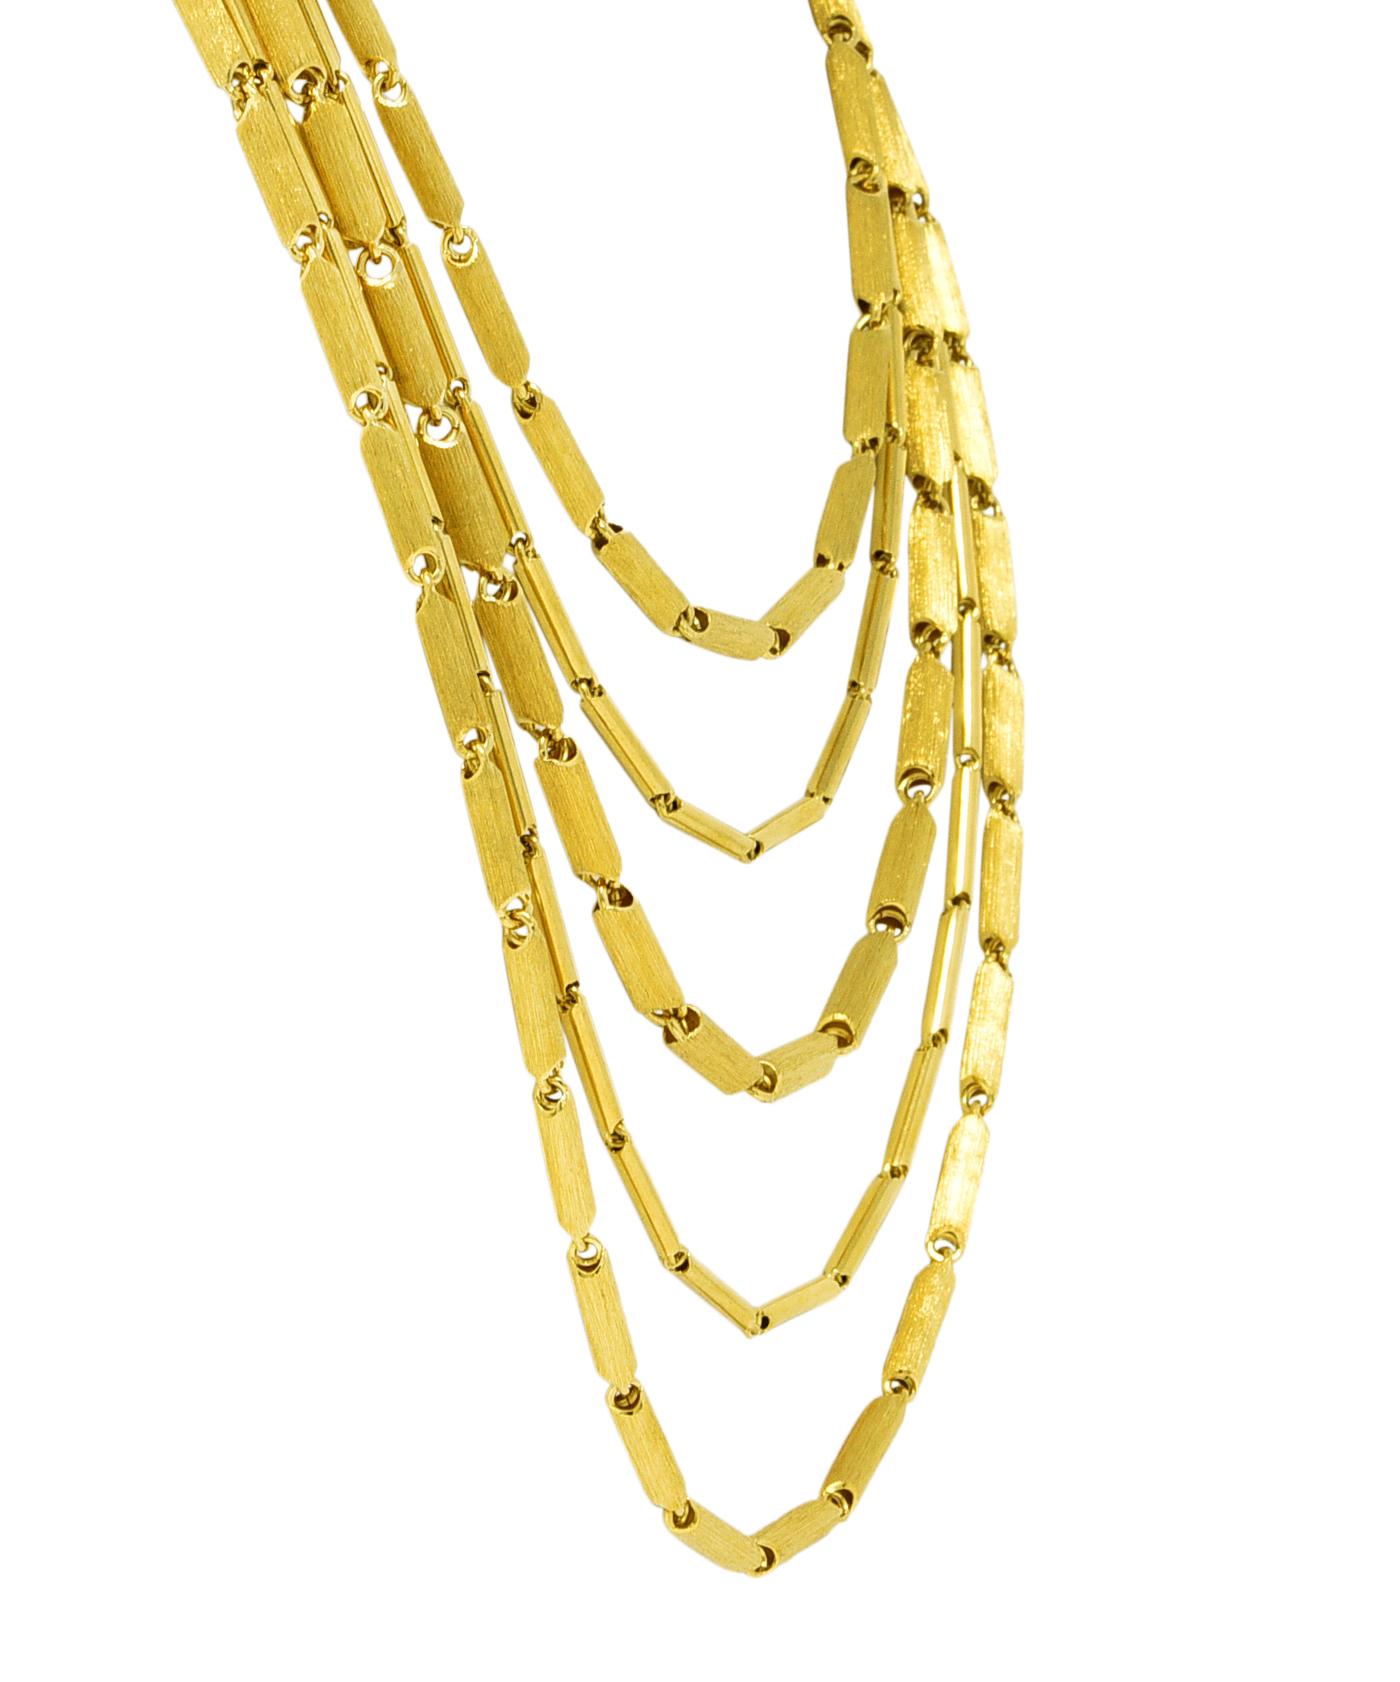 Contemporary Henry Dunay 18 Karat Yellow Gold Multi-Strand Chain Link Vintage Necklace